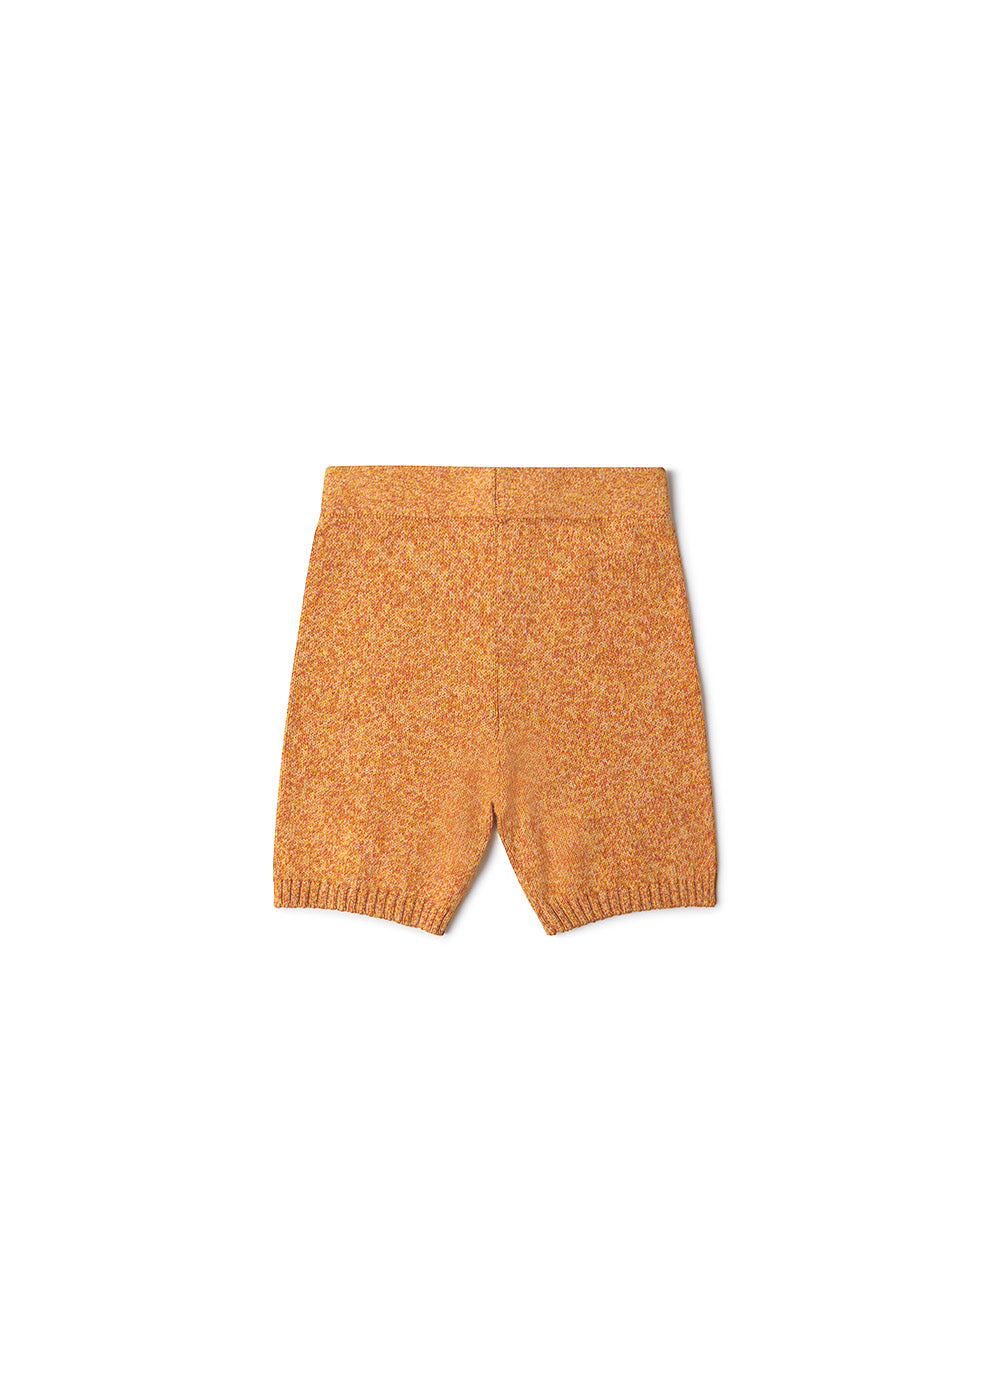 York Knitted Shorts - 1Y-2Y / Mixed Yellow